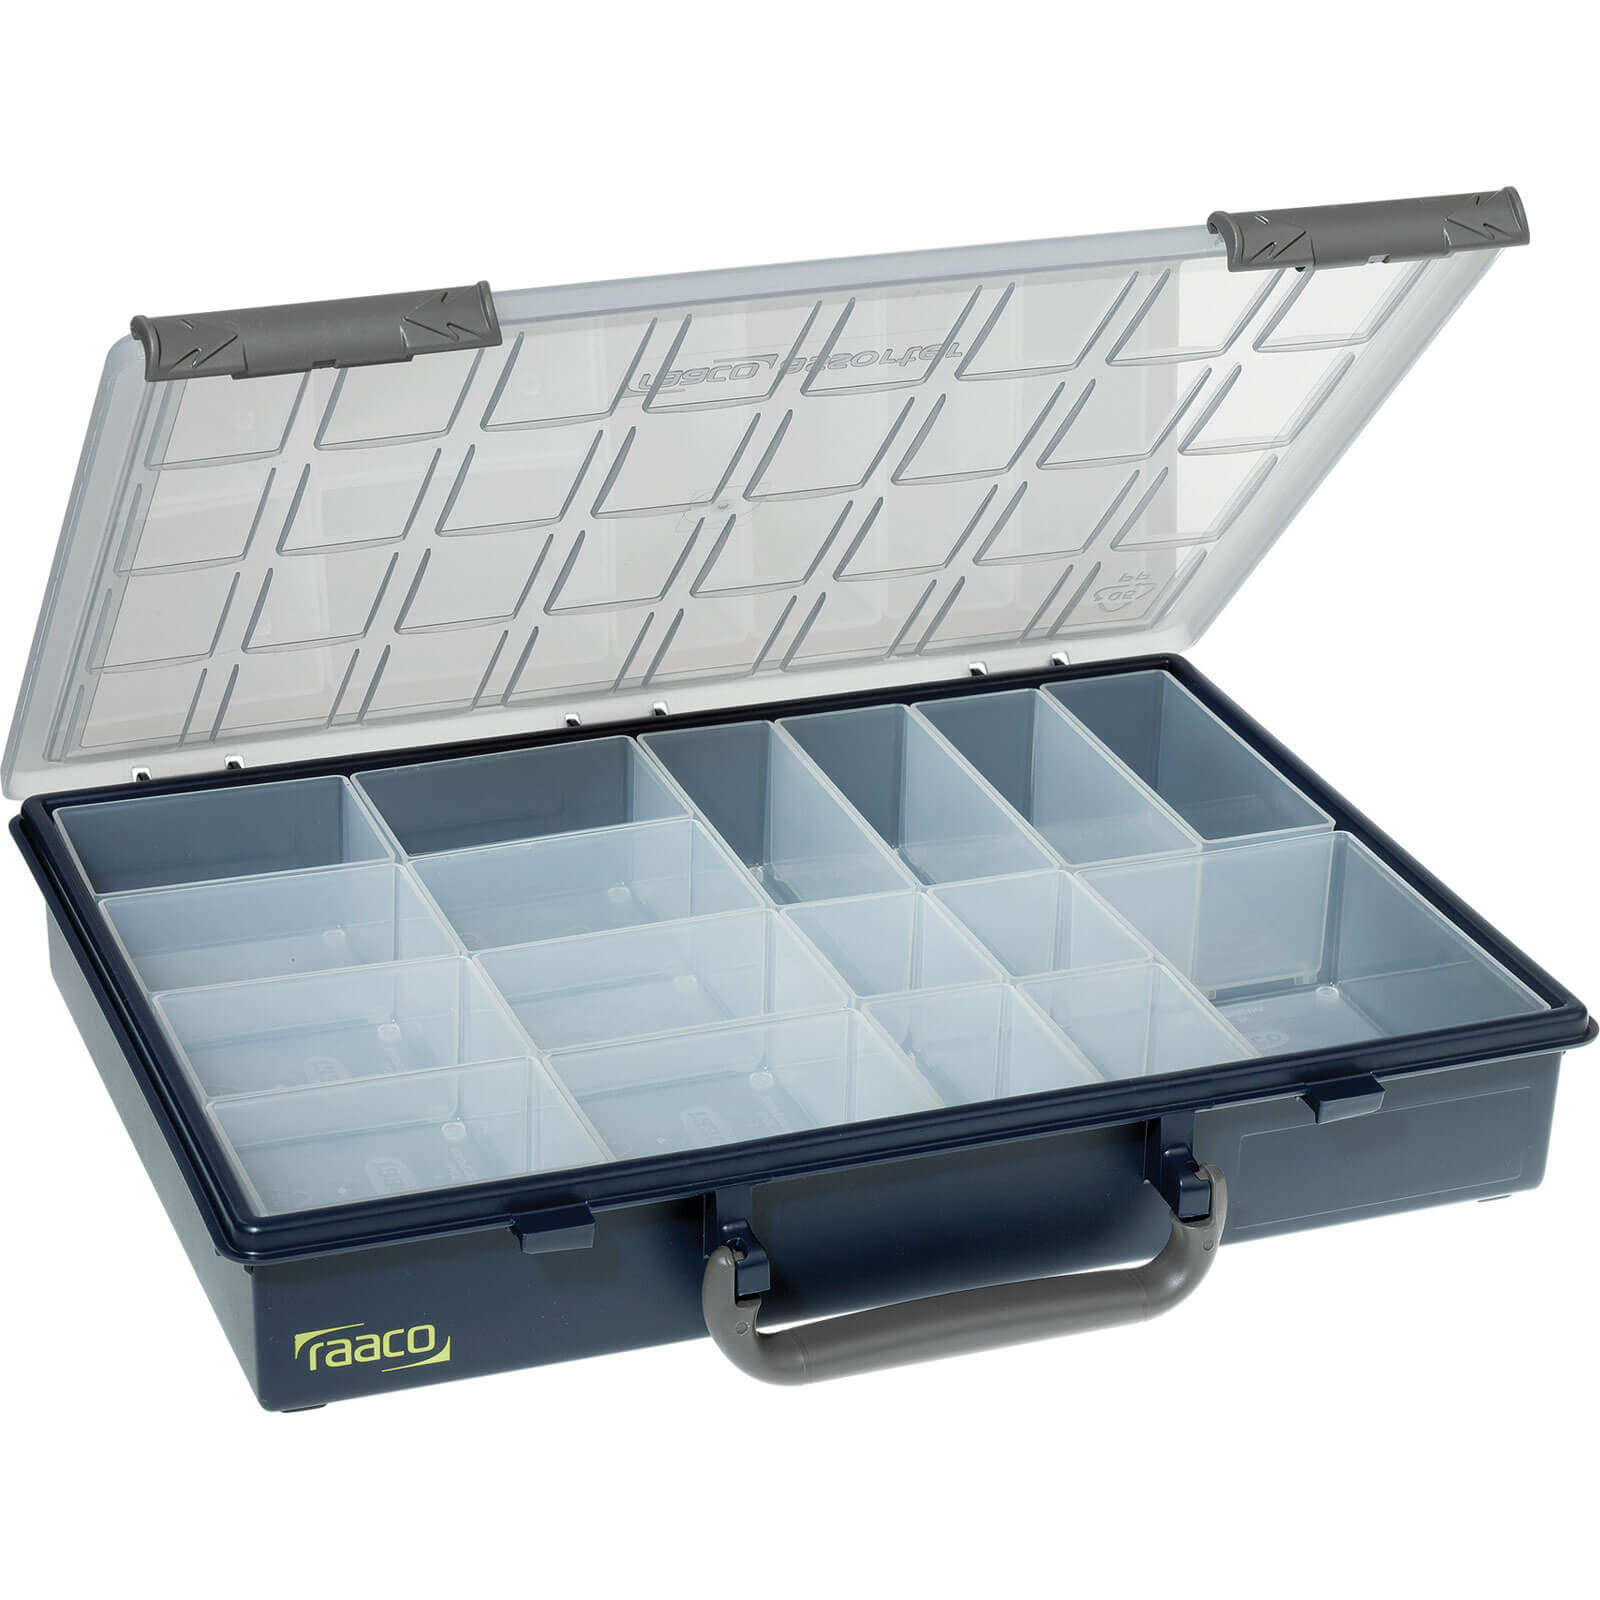 Image of Raaco 17 Compartment A4 Organiser Case